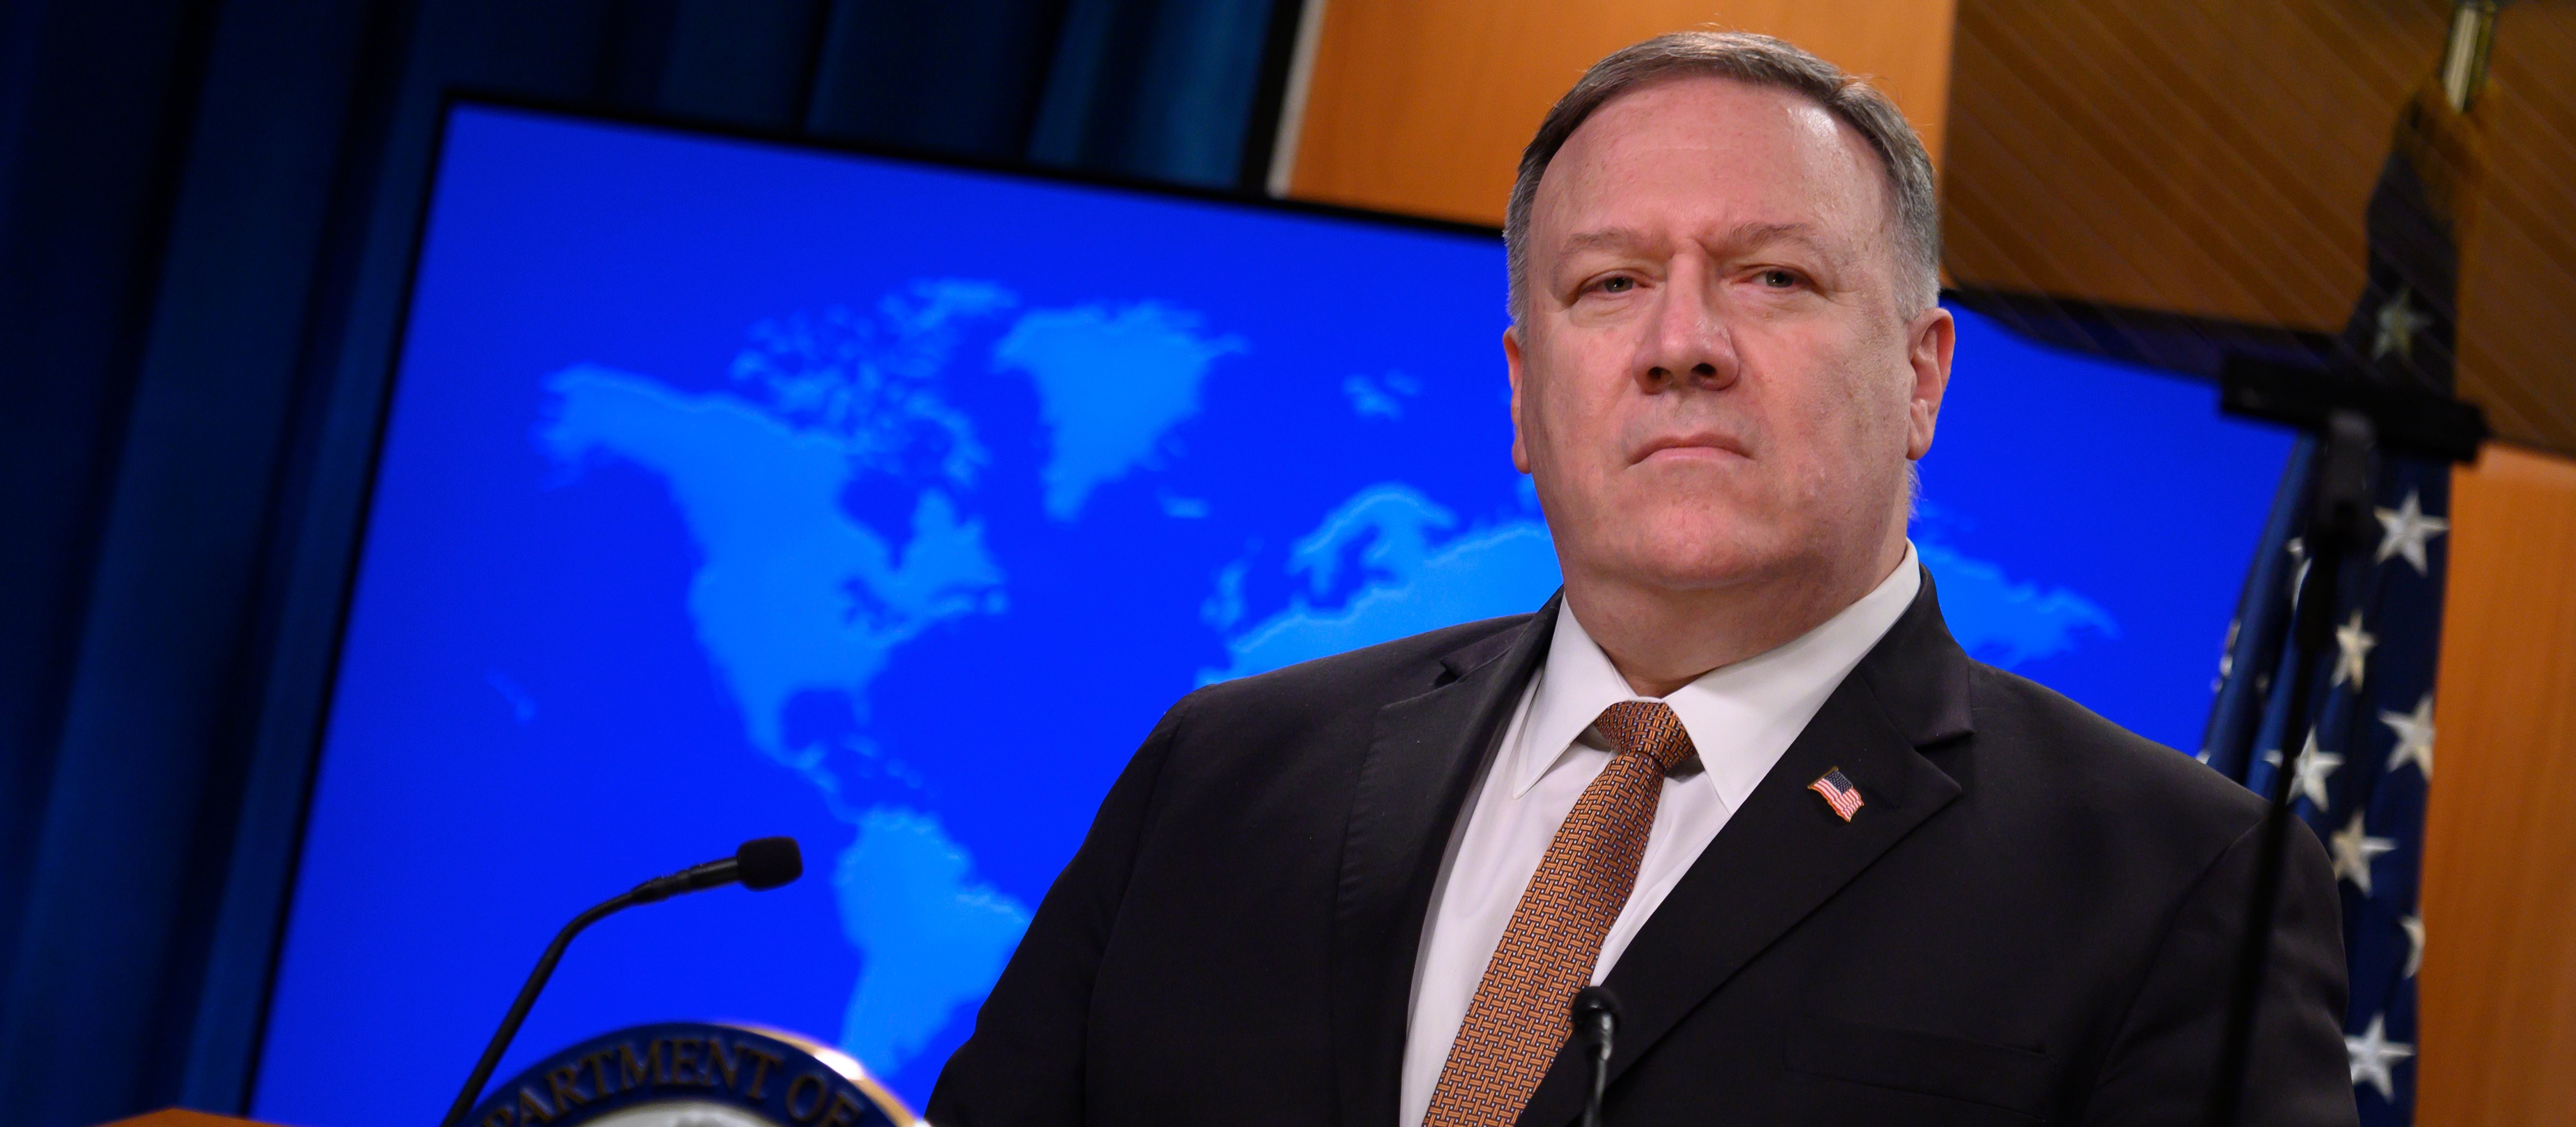 US Secretary of State Mike Pompeo speaks during a press conference at the State Department in Washington. (ANDREW CABALLERO-REYNOLDS / AFP) (Photo by ANDREW CABALLERO-REYNOLDS/AFP via Getty Images)